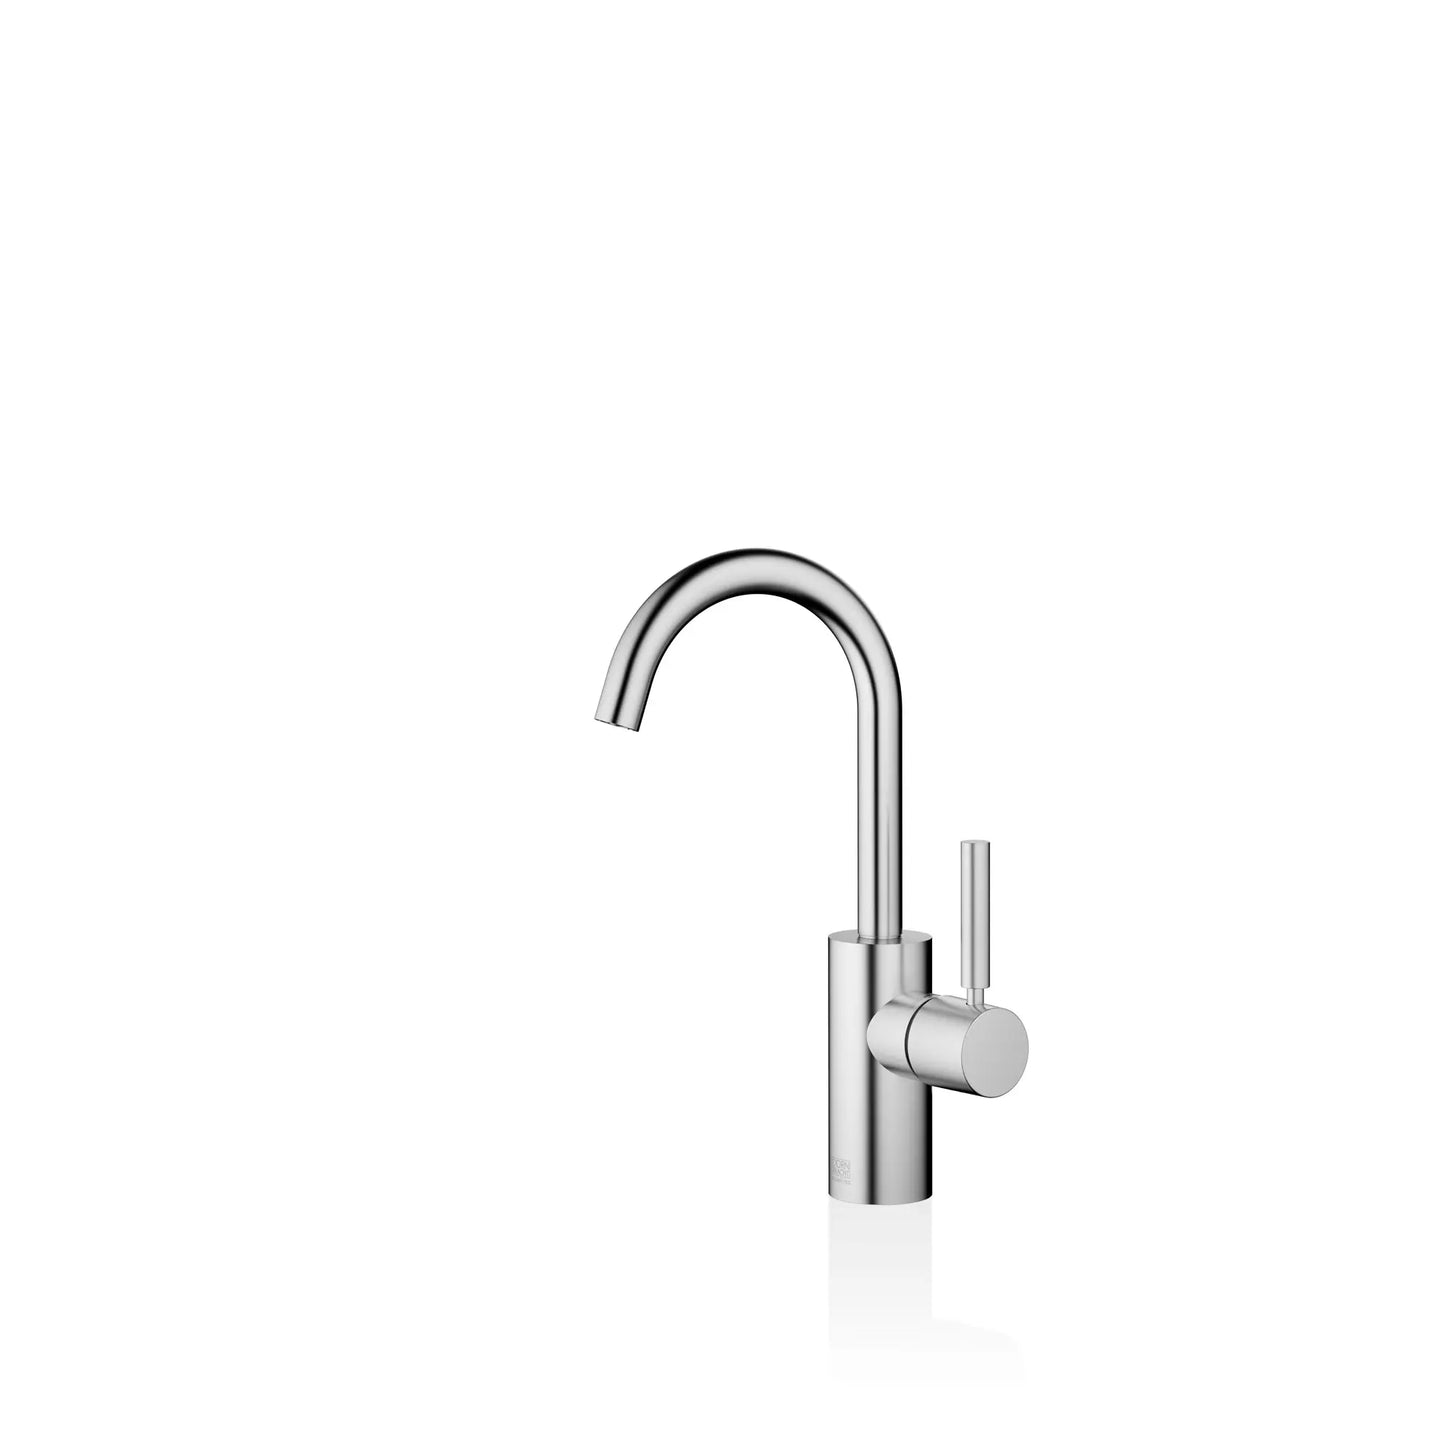 META Single-lever basin mixer without pop-up waste